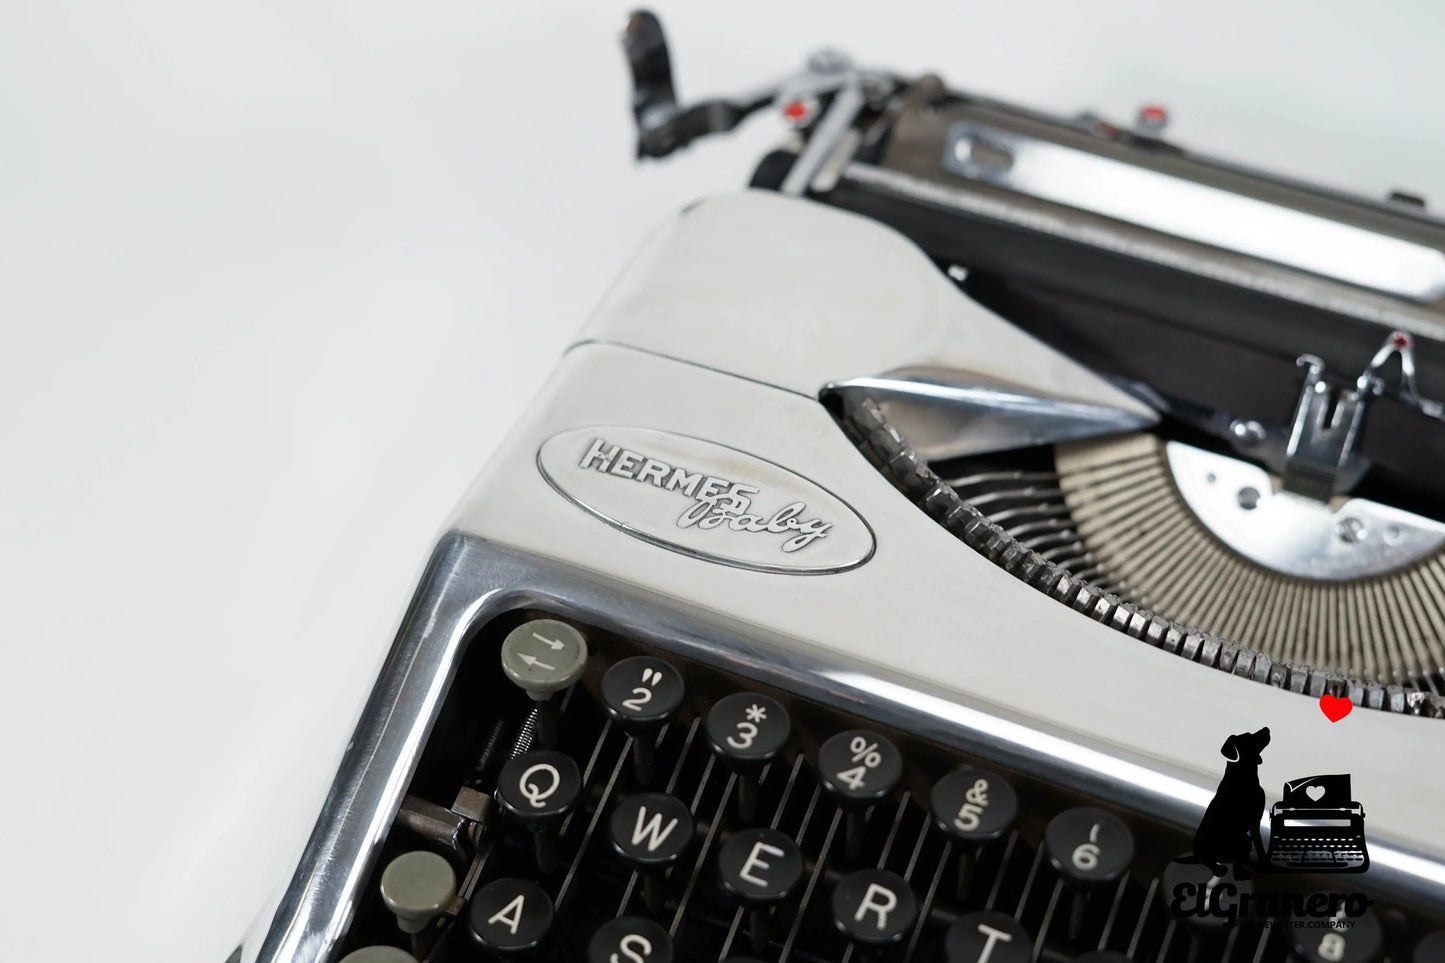 SALE! - Limited Edition Hermes Baby Polished Silver, Vintage, Mint Condition, Professionally Serviced - ElGranero Typewriter.Company